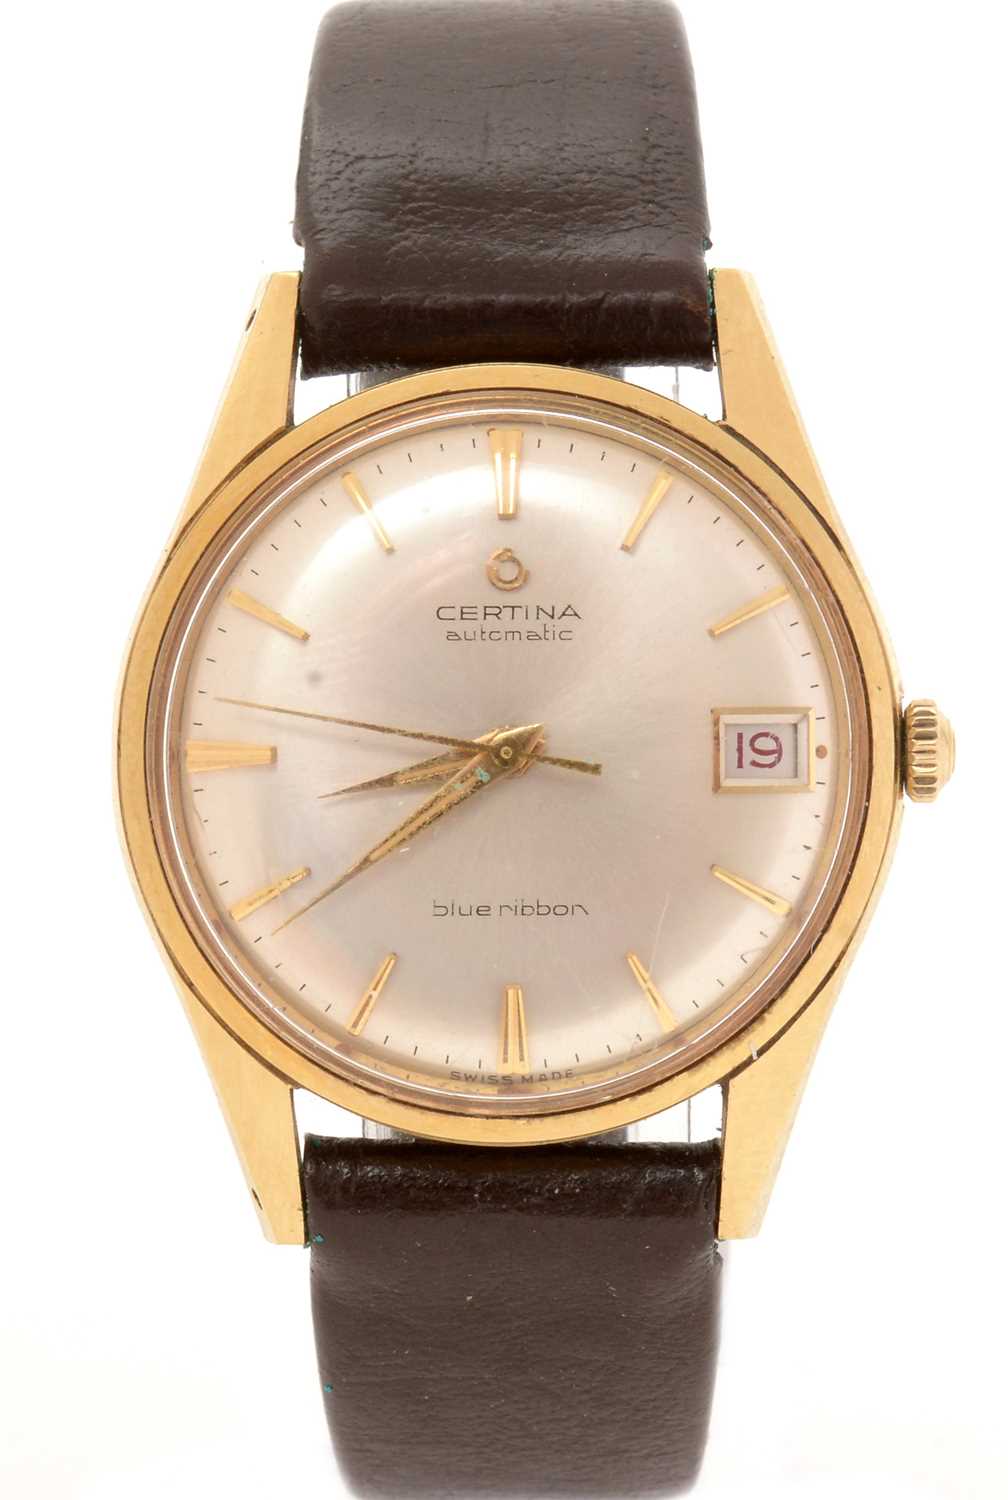 Lot 43 - Certina, Blue Ribbon: an 18ct yellow gold cased automatic wristwatch